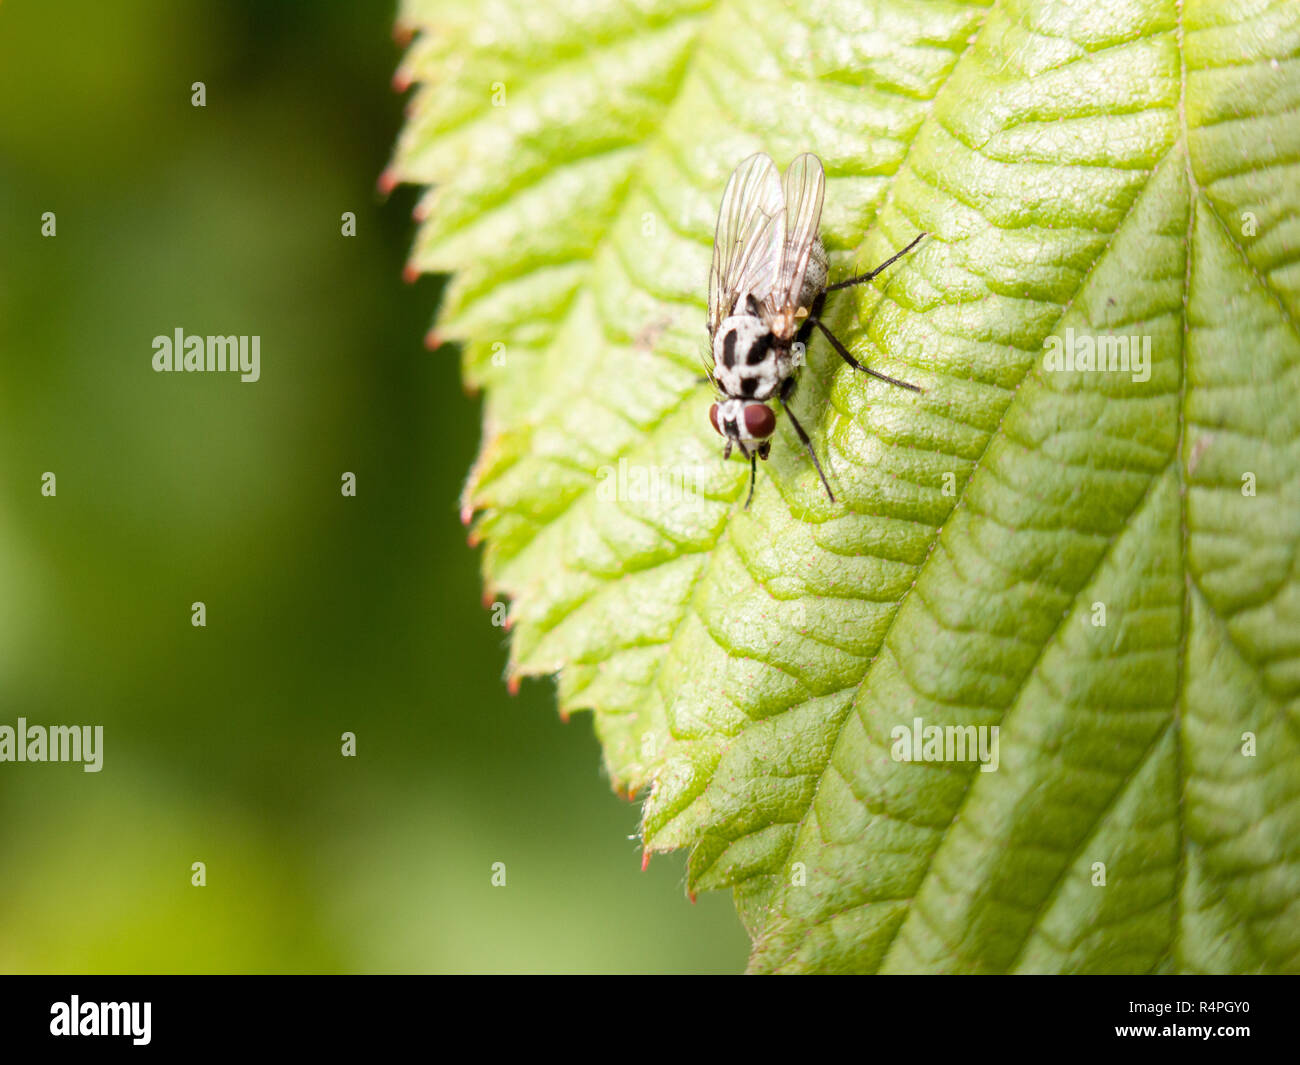 a fly close up on a leaf resting still macro Stock Photo